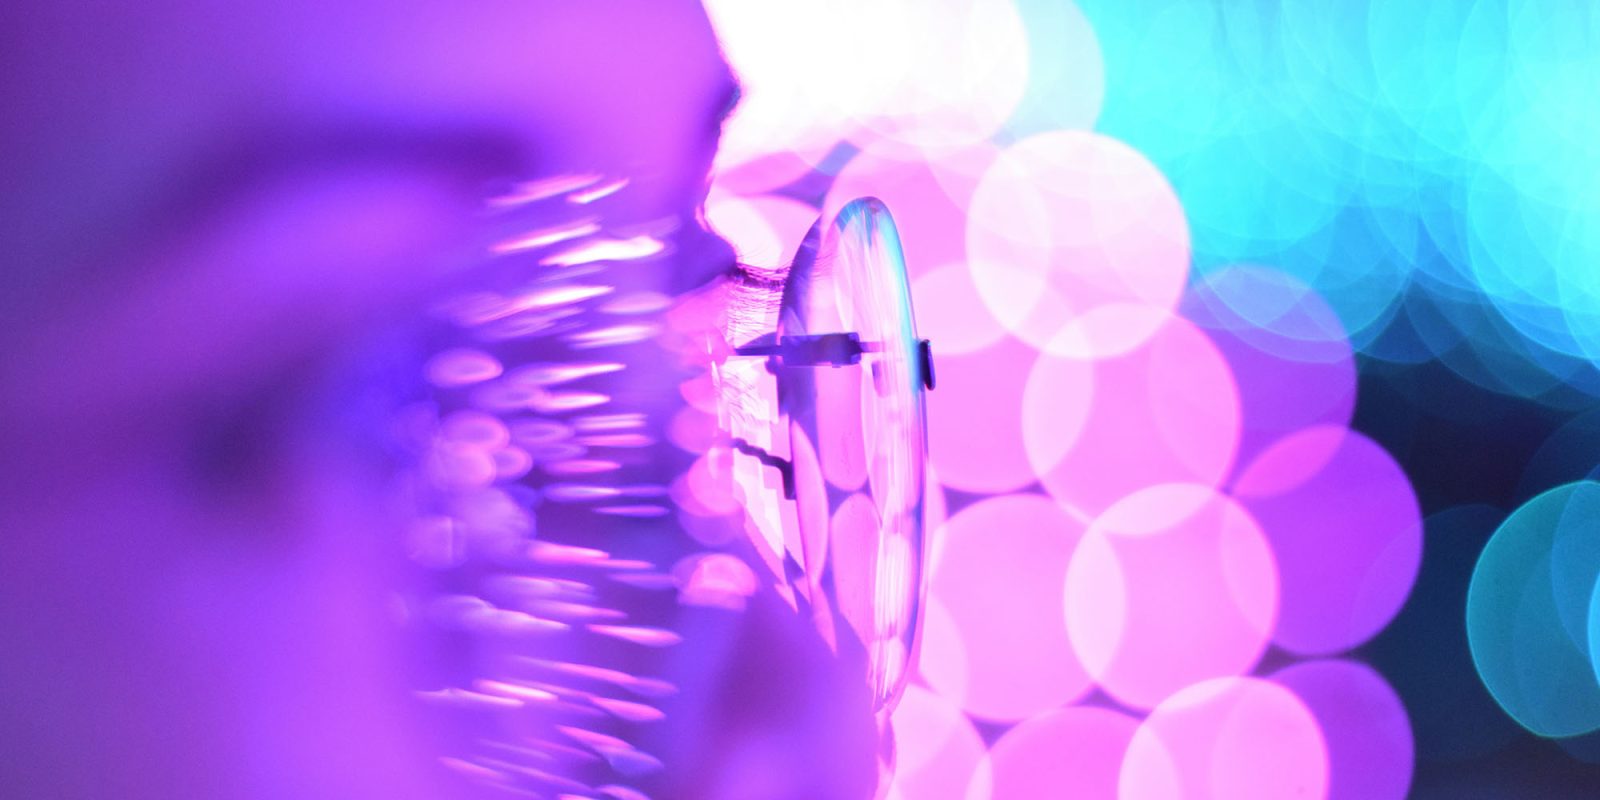 Meta Glasses expected to be revealed in the fall | Colorful conceptual image